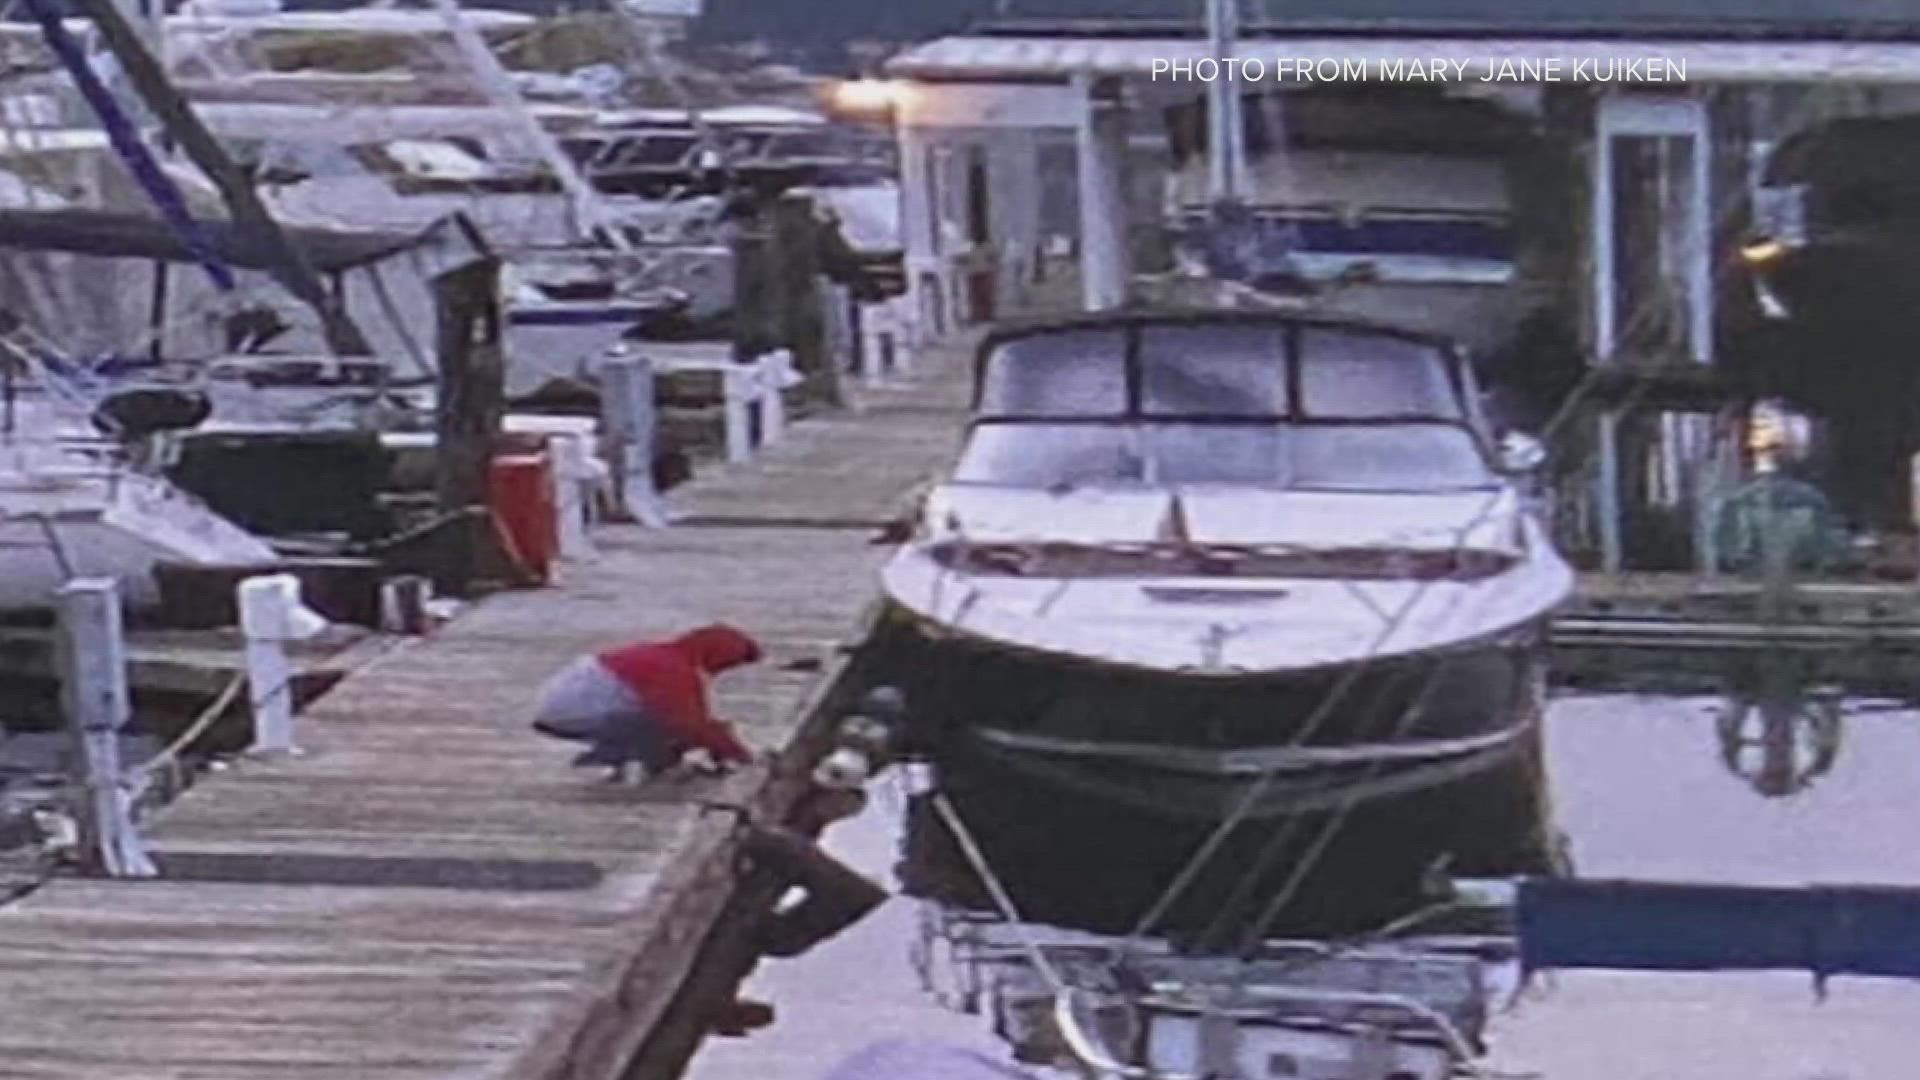 Gig Harbor Police Chief Kelly Busey said boat theft is rare in Gig Harbor which houses upwards of 1,500 vessels.